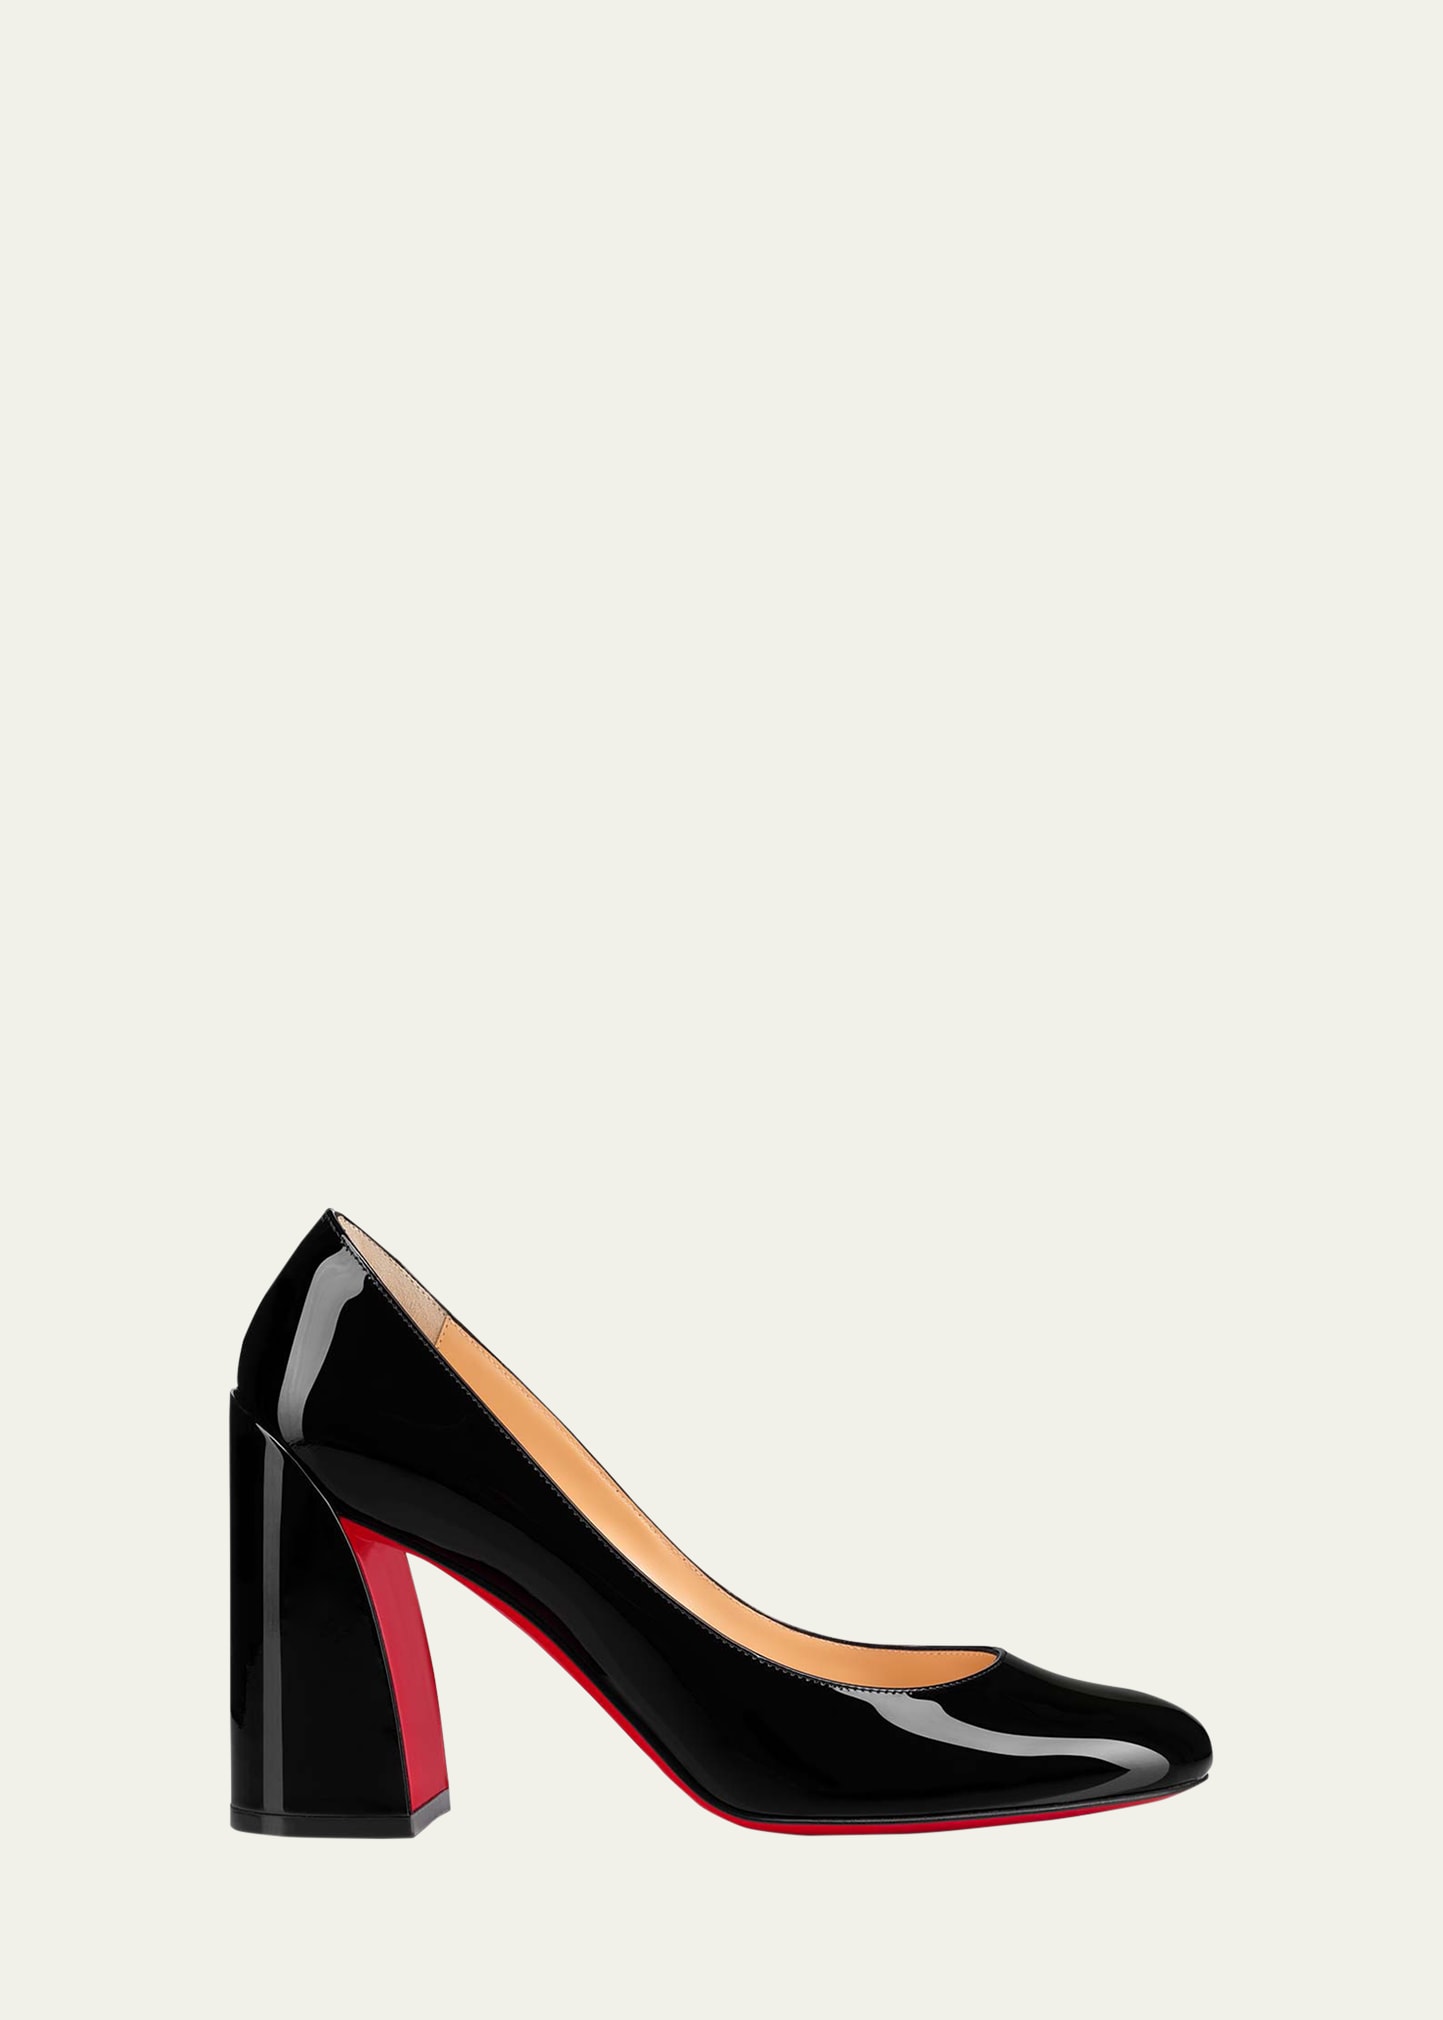 Miss Sab Patent Red Sole Pumps